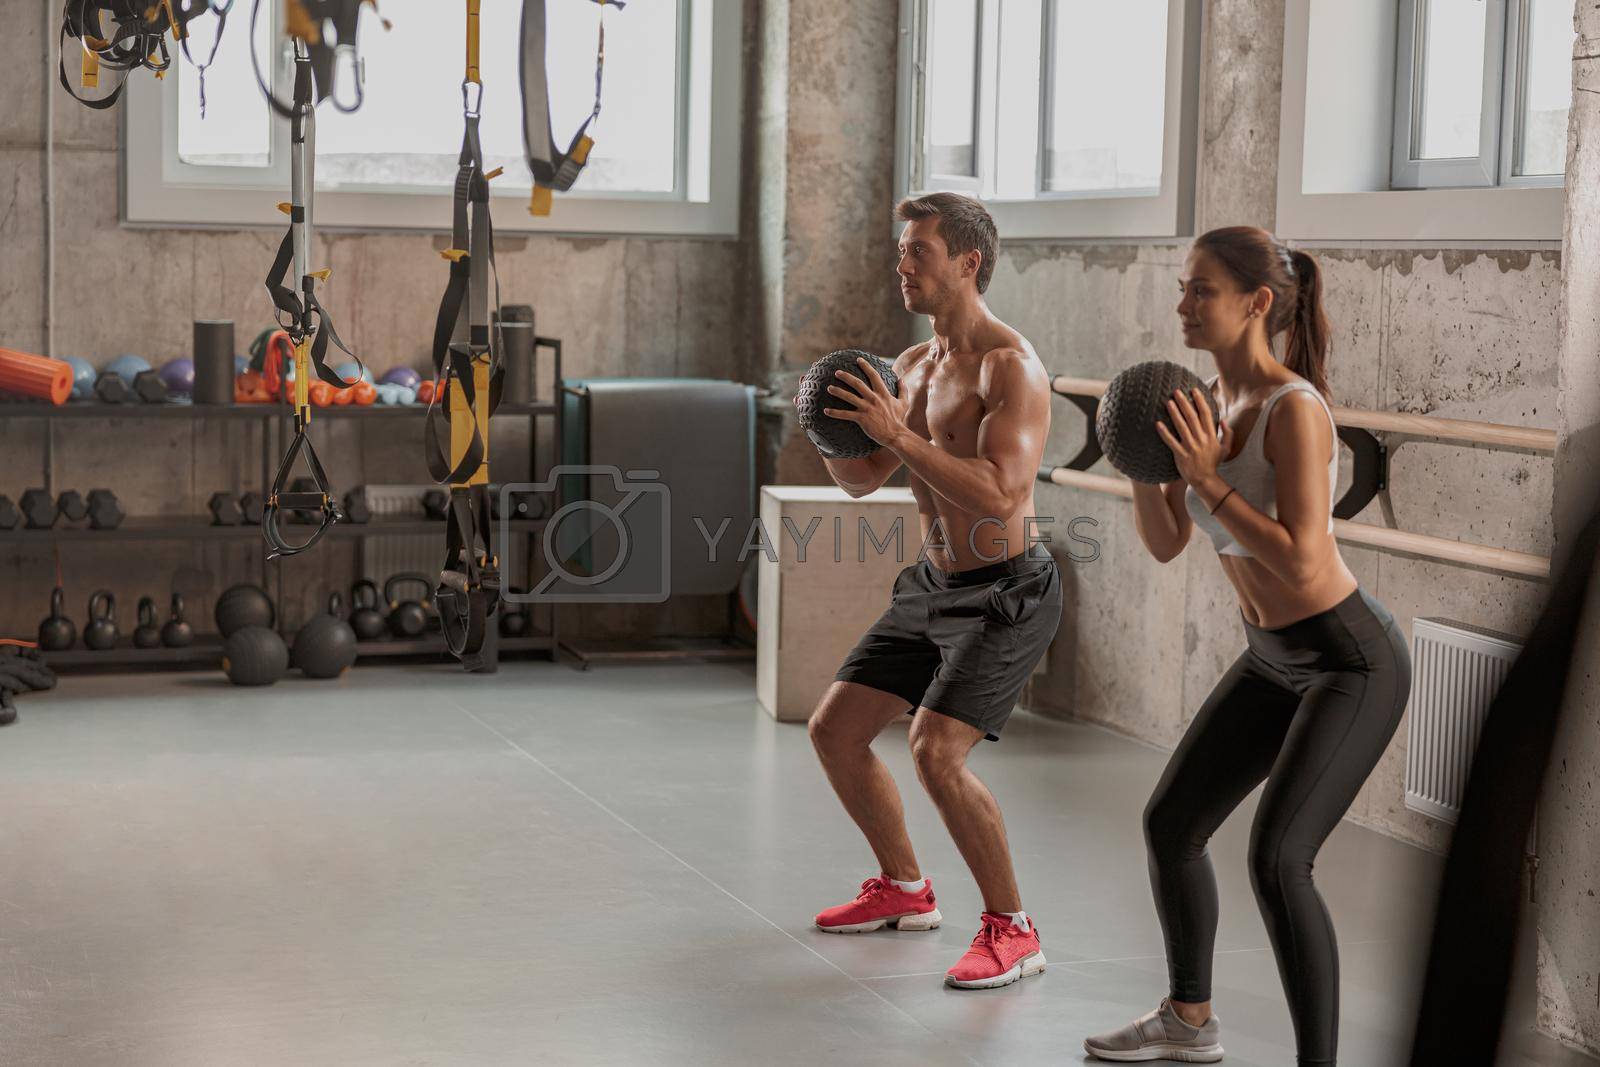 Concentrated sporty man and woman with athletic bodies working out with exercise ball in gym club